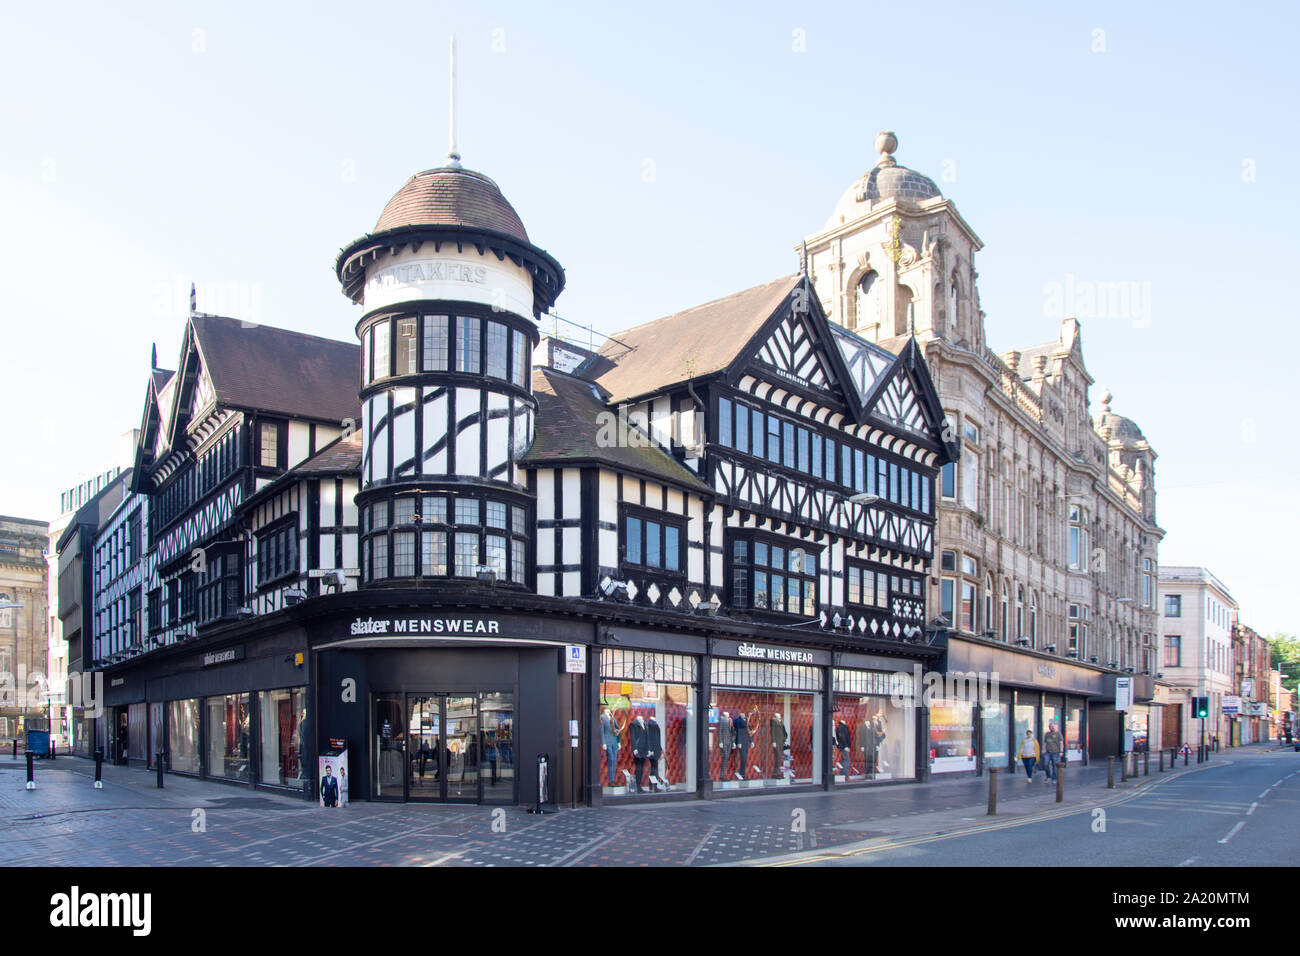 Timber-framed buildings, Deansgate, Bolton, Greater Manchester, England, United Kingdom Stock Photo